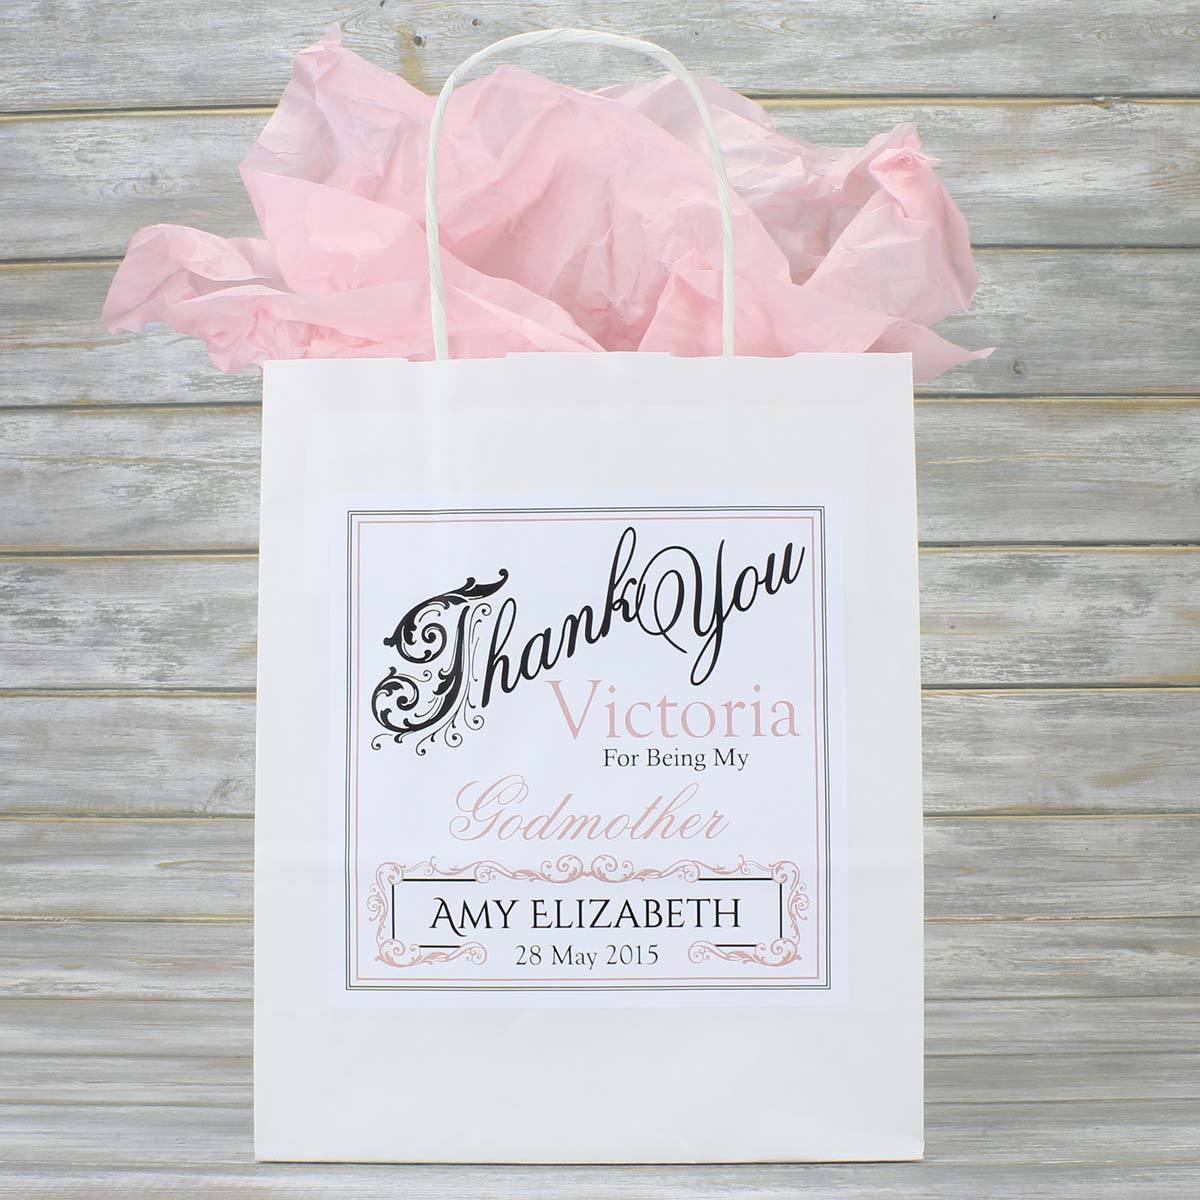 Christening Bag - Personalised Christening Gift Bag With Matching Tissue Paper